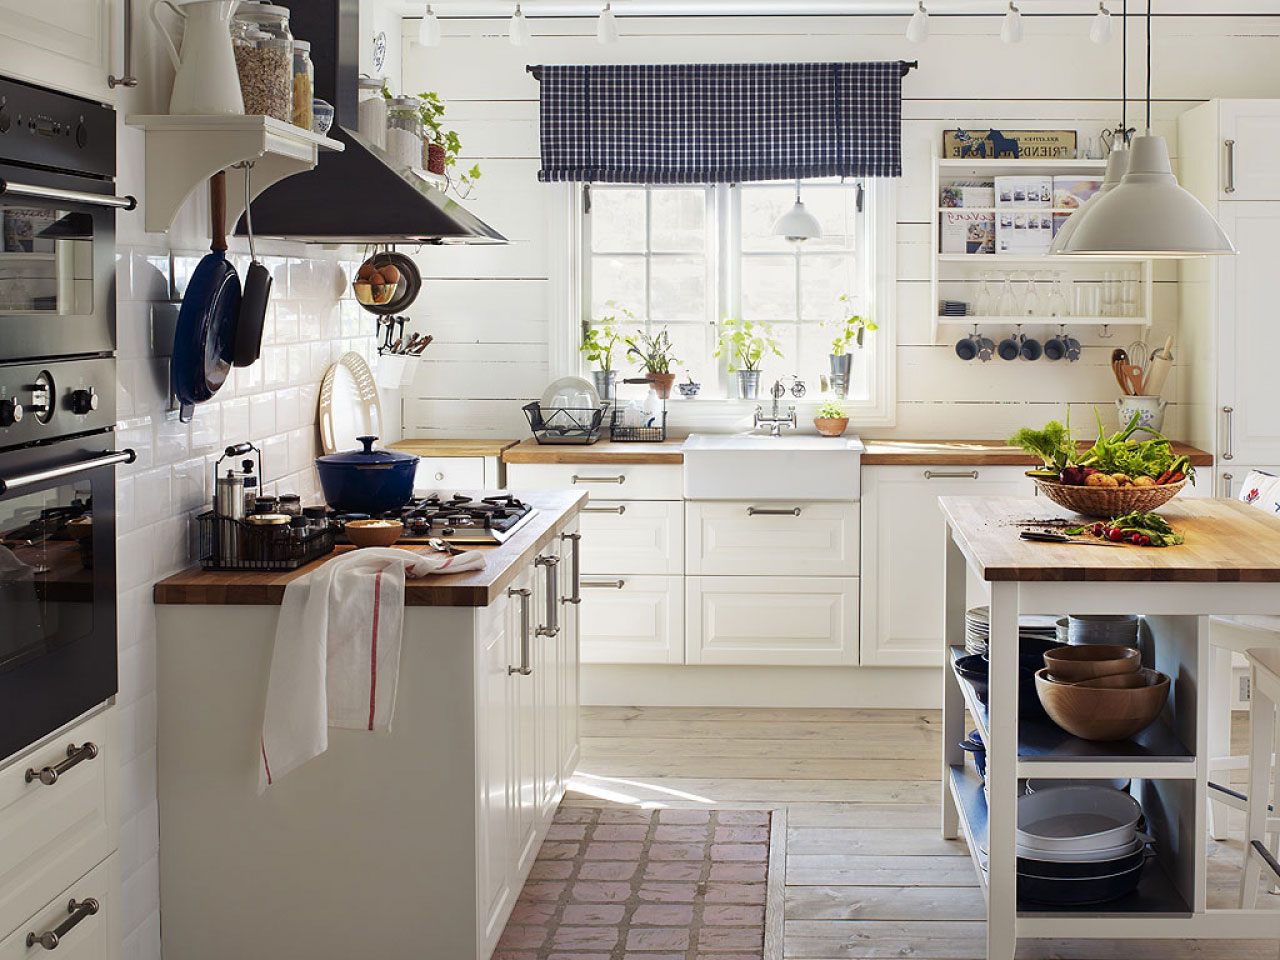 Old Fashioned Gray Kitchens photo - 8